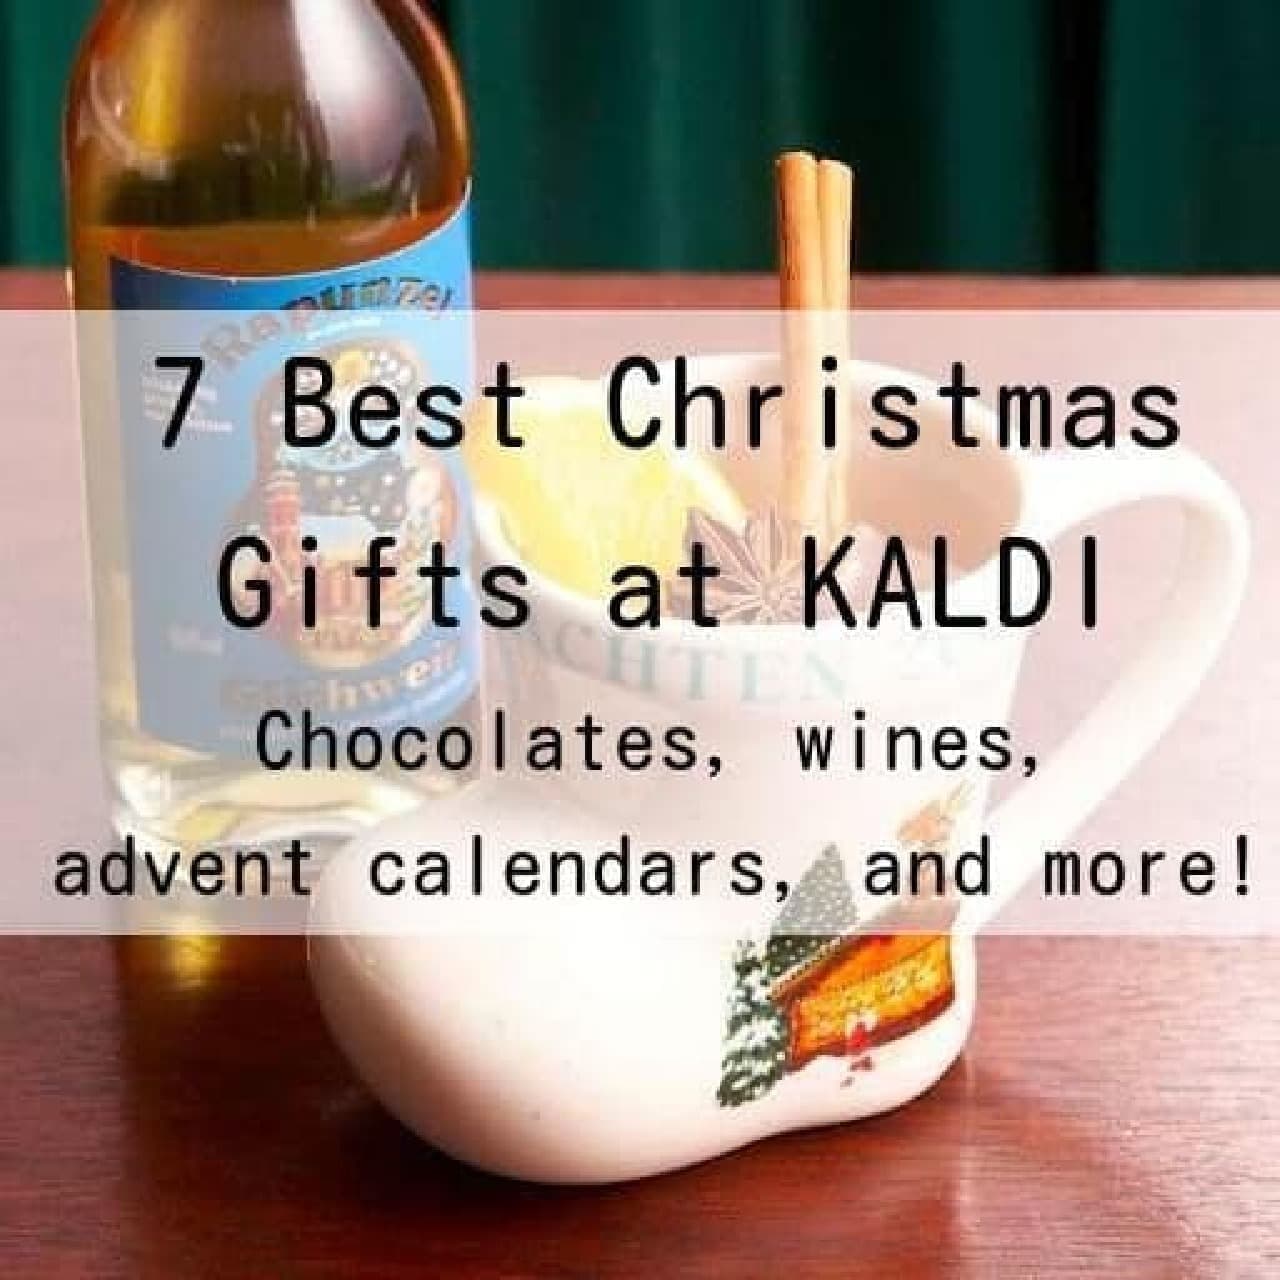 KALDI's Recommended Christmas Gifts